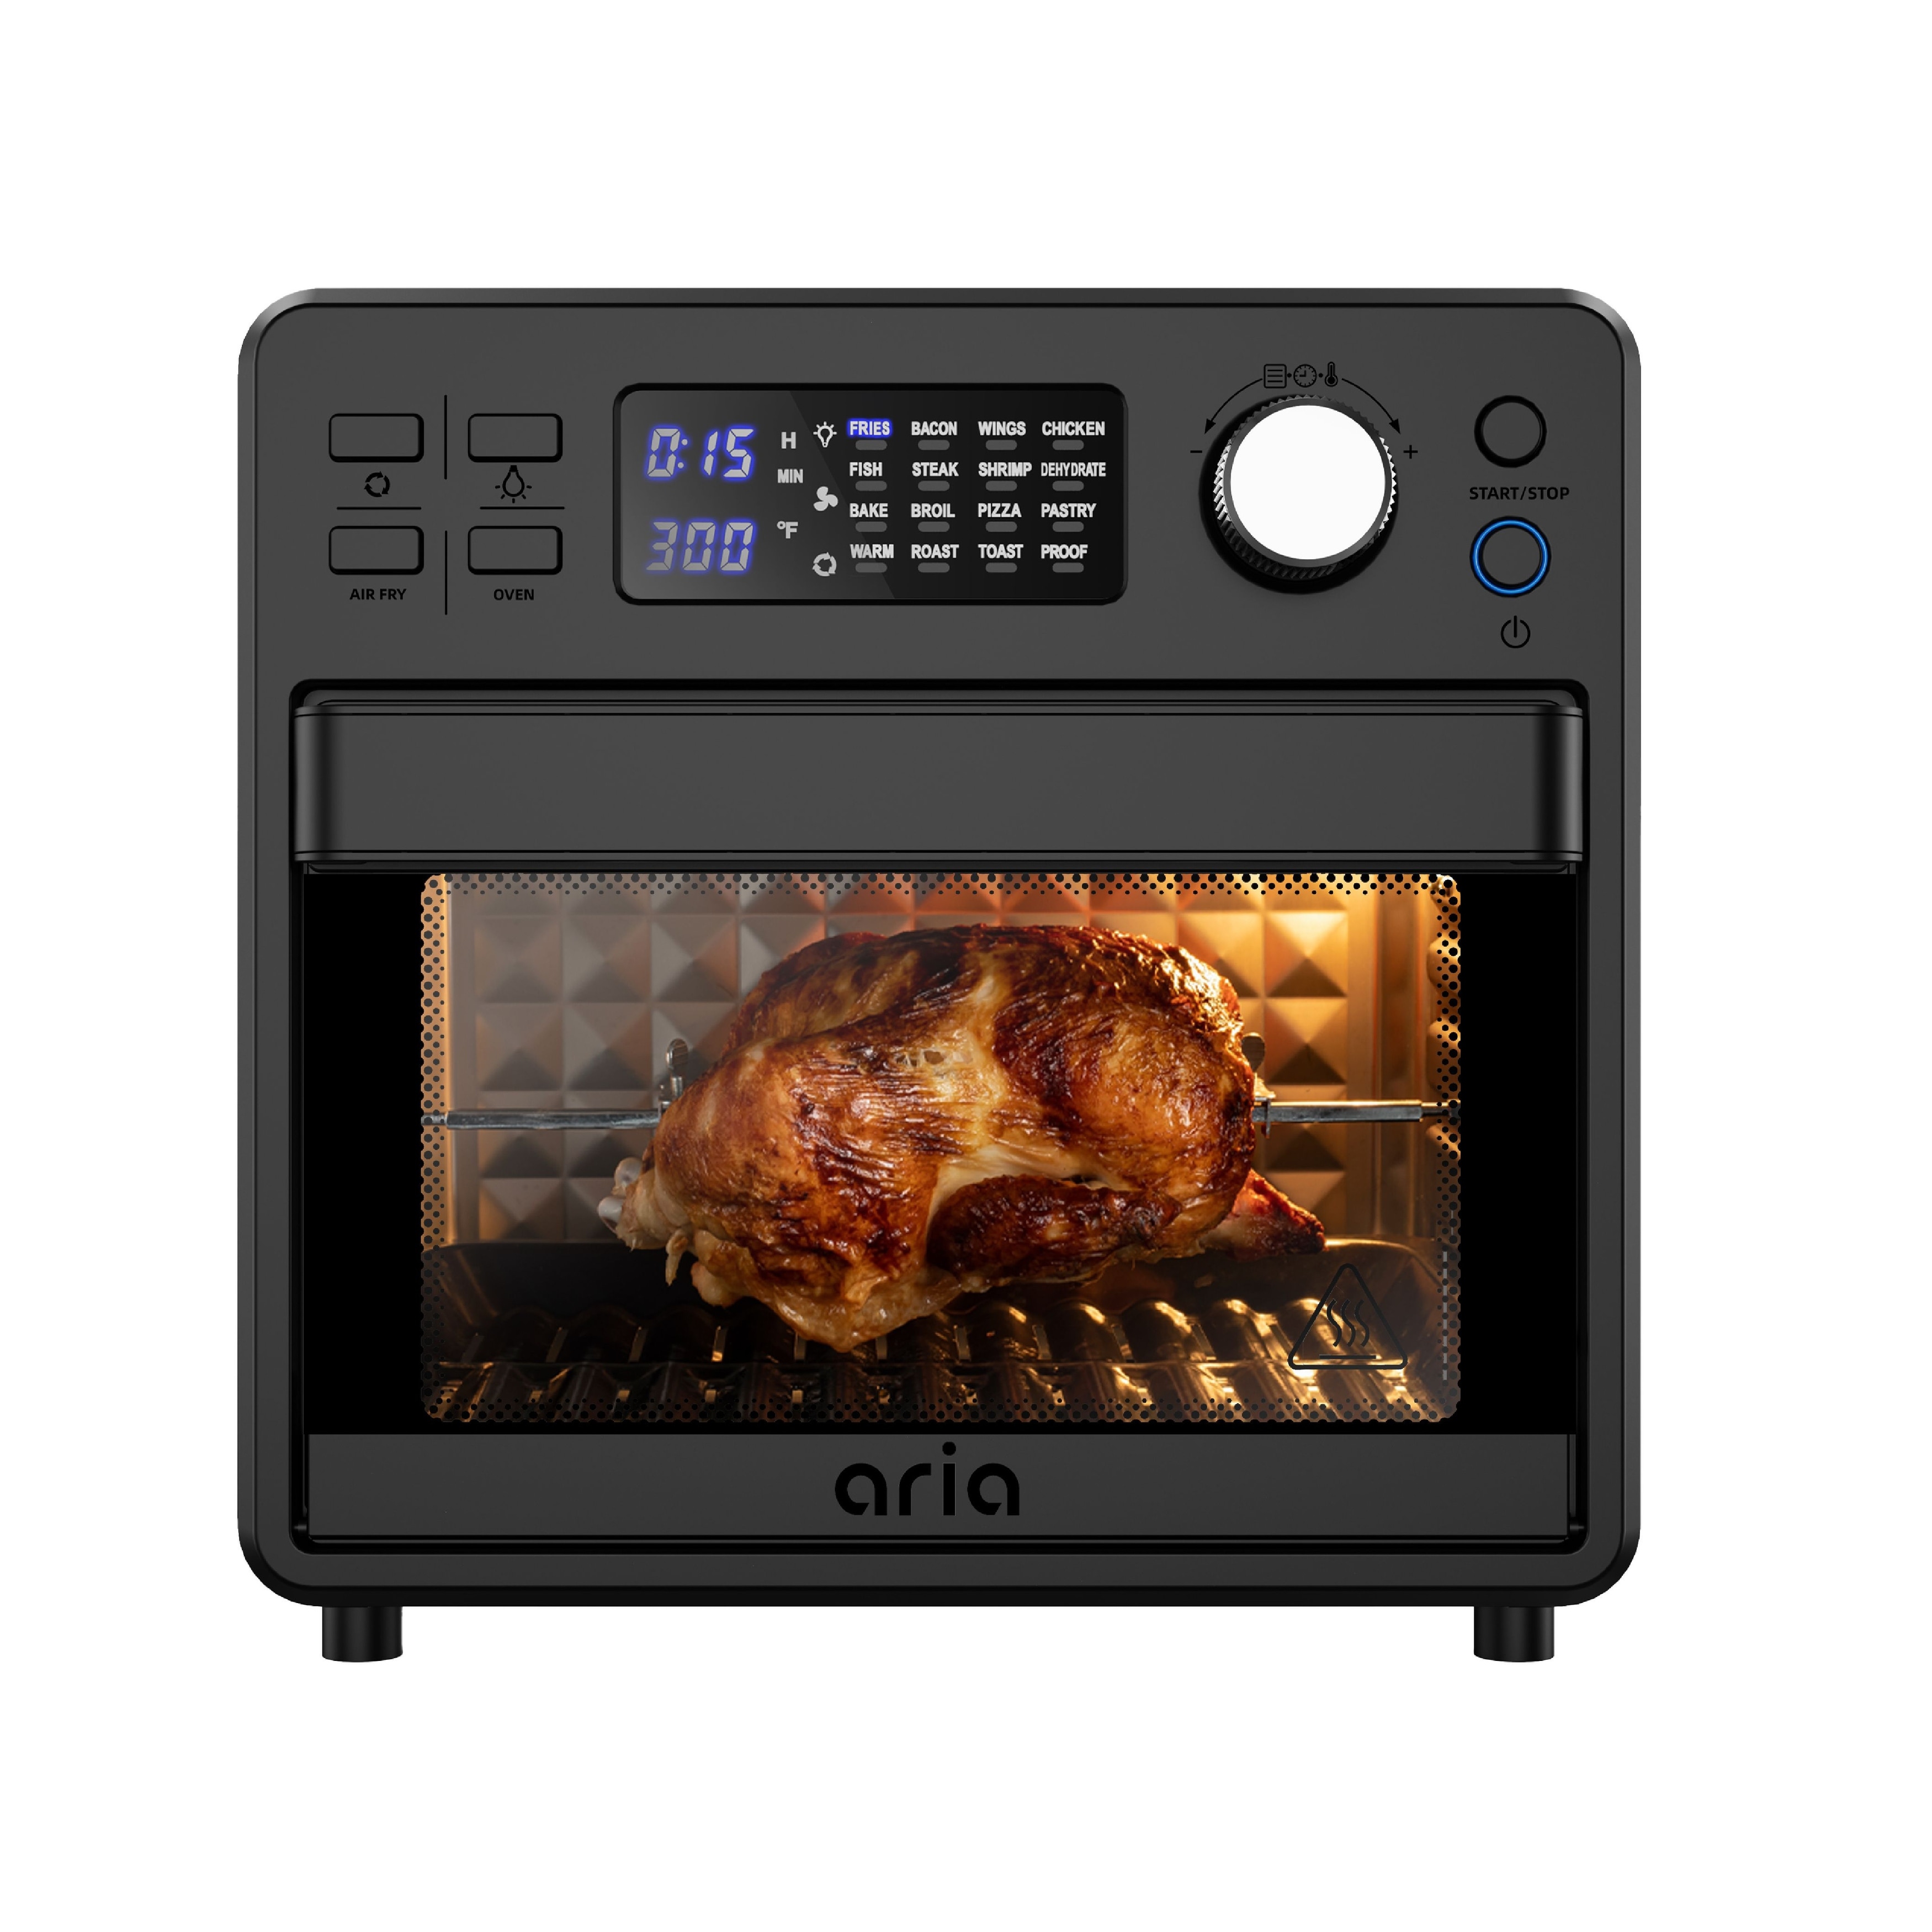 Toaster Oven Air Fryer 10-in-1 Combo Just $99.99 Shipped on